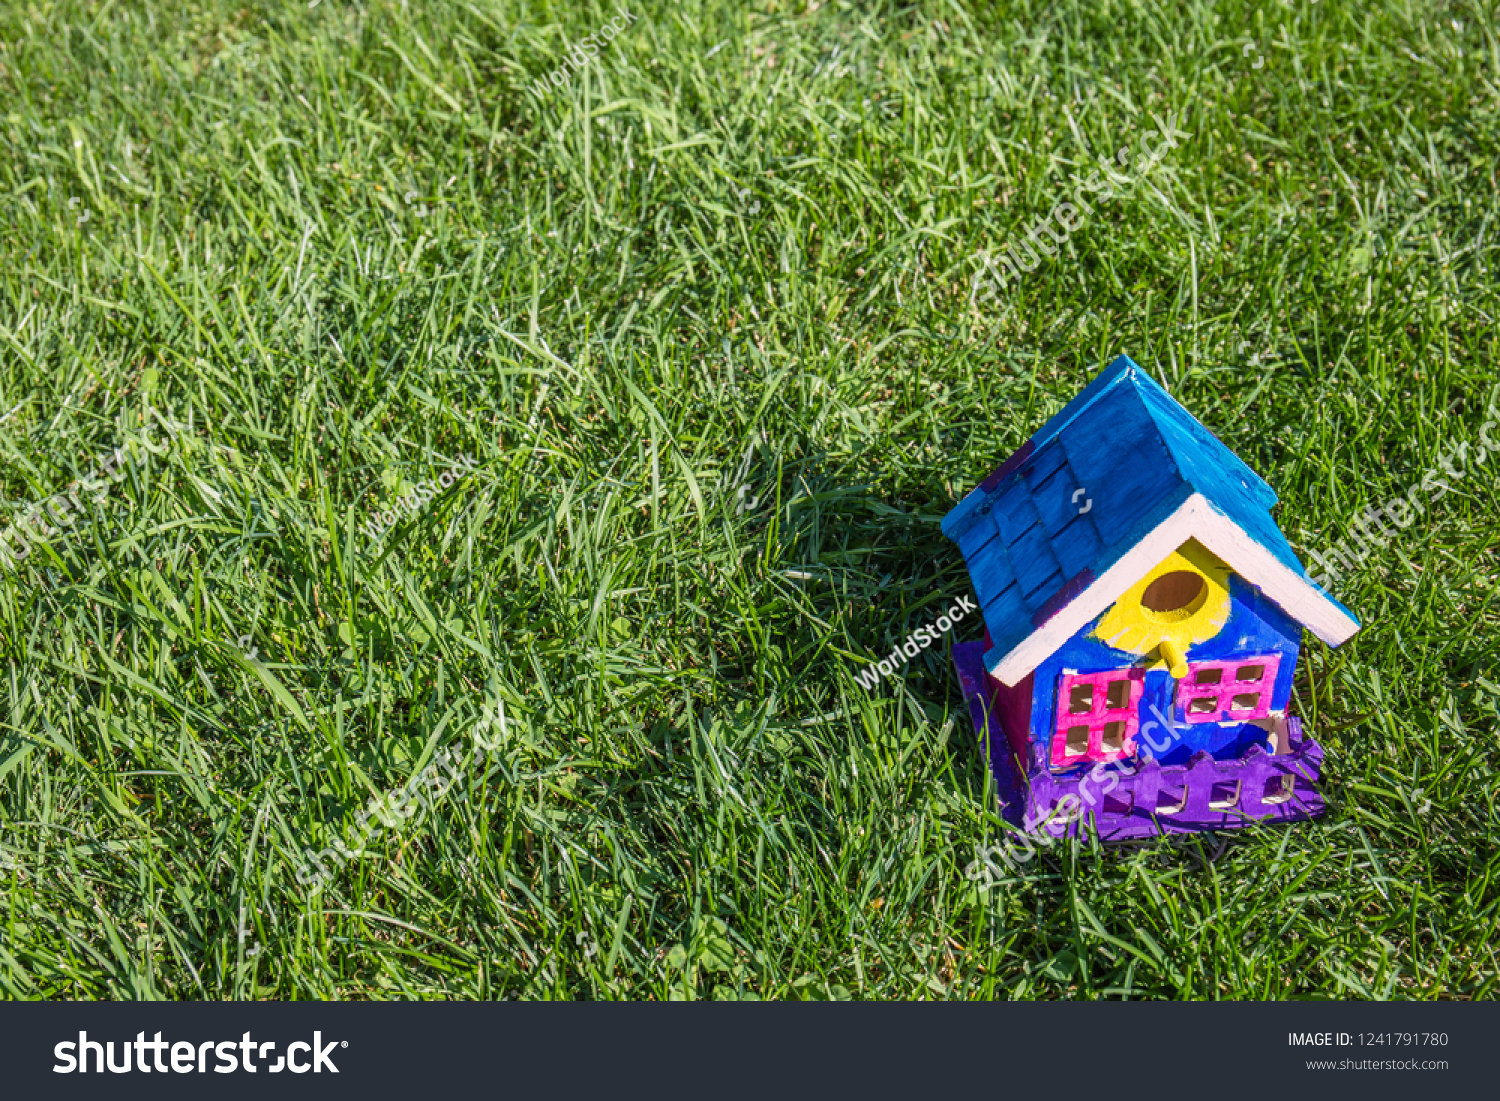 A handmade, colorful, brightly painted bird house resembling a family home in the bottom corner of a green lawn in bright sunshine. #1241791780